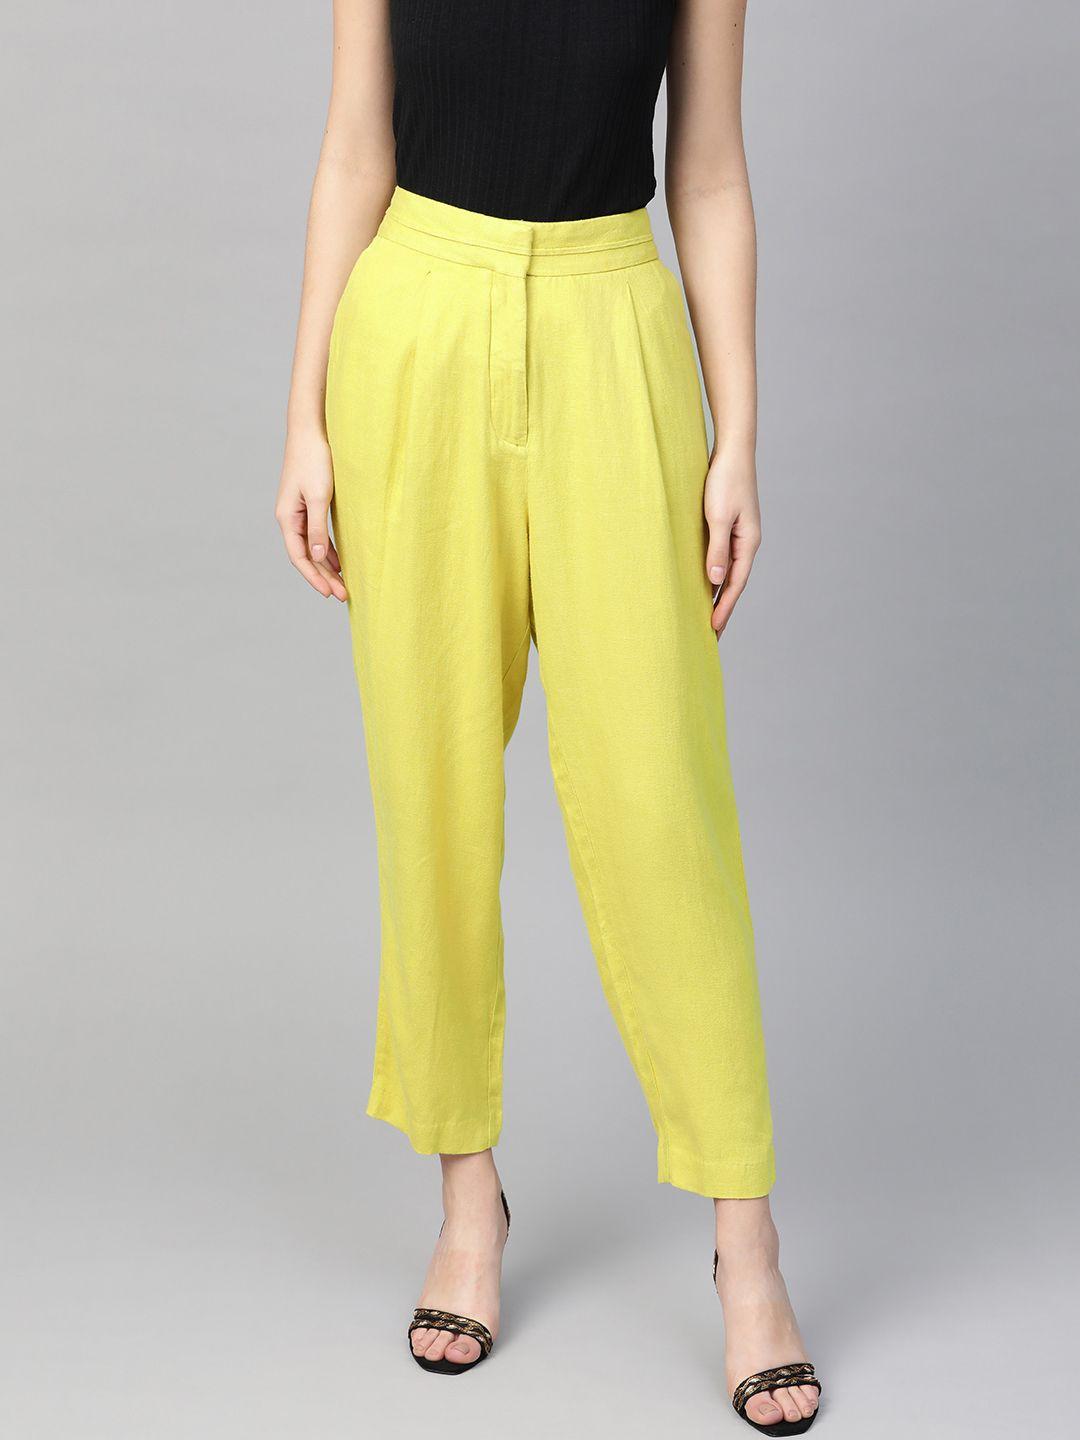 marks-&-spencer-women-lime-green-tapered-fit-solid-regular-trousers